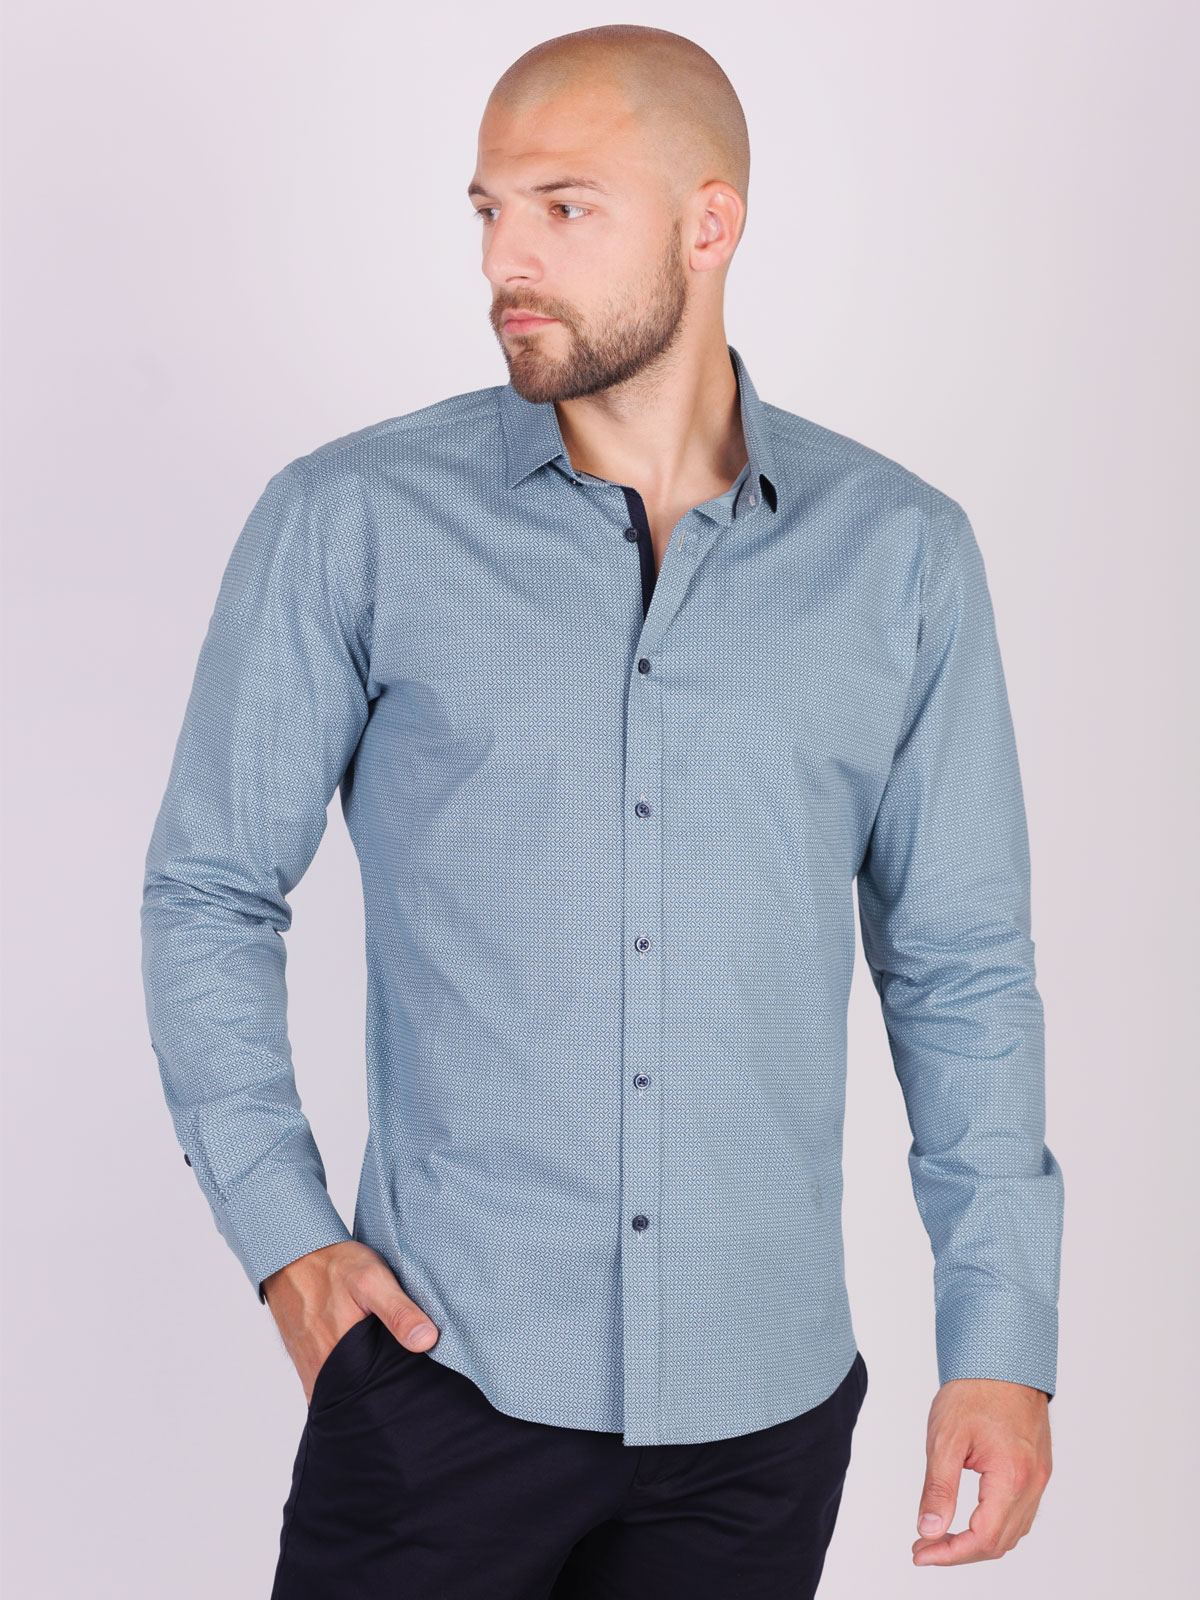 Mens shirt in olive green - 21578 € 44.43 img4